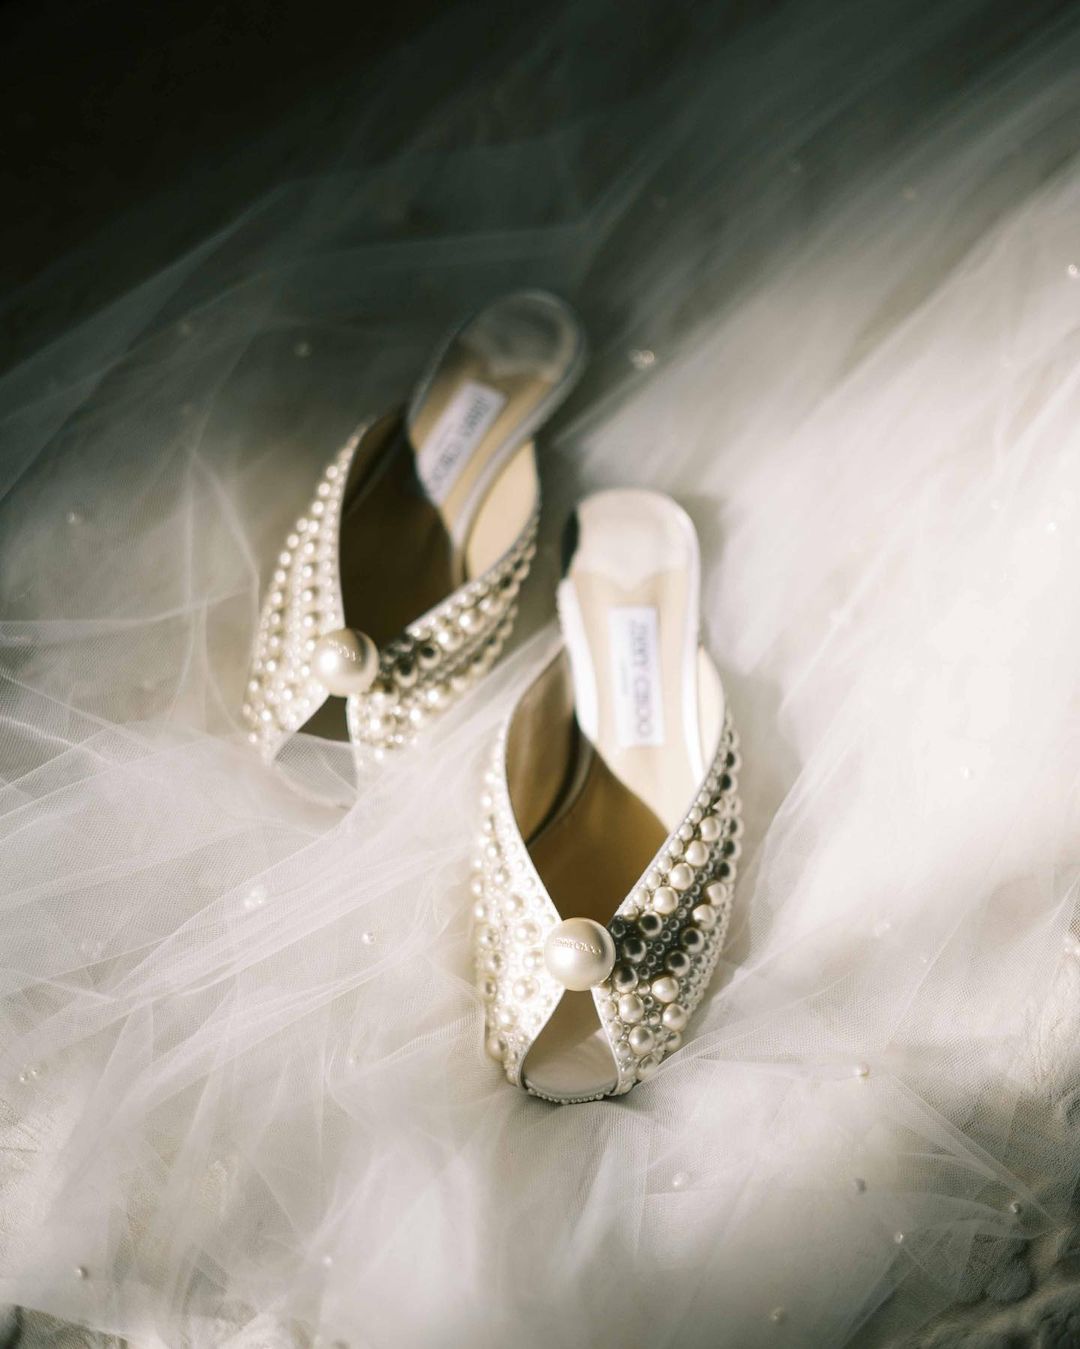 Image of pearl Jimmy Choo shoes on top of a bridal veil